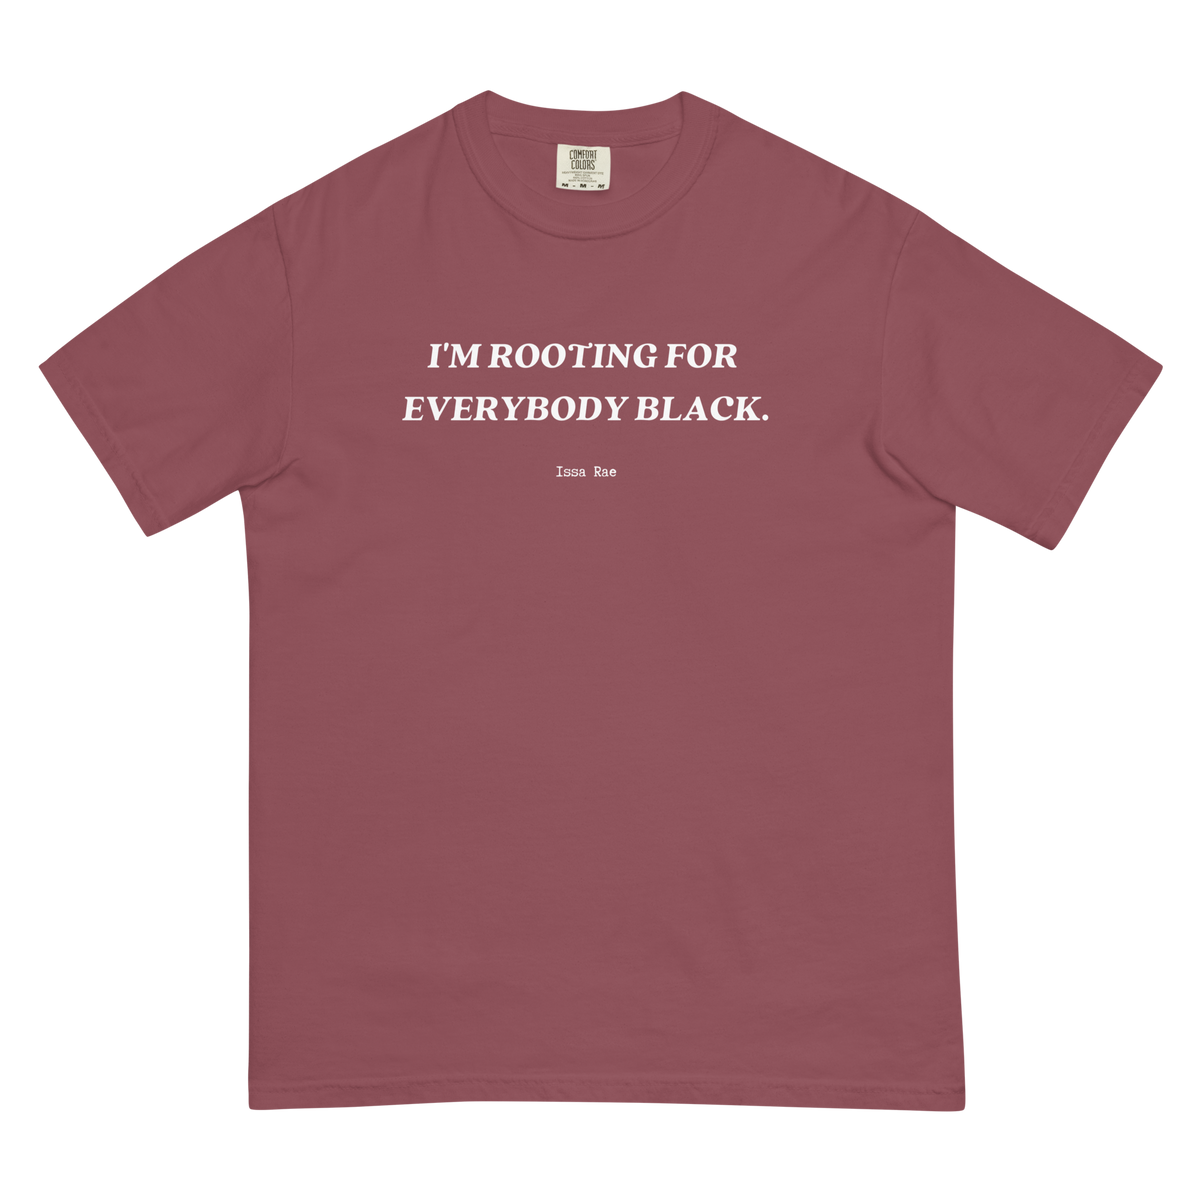 Rooting for Everybody Black Tee